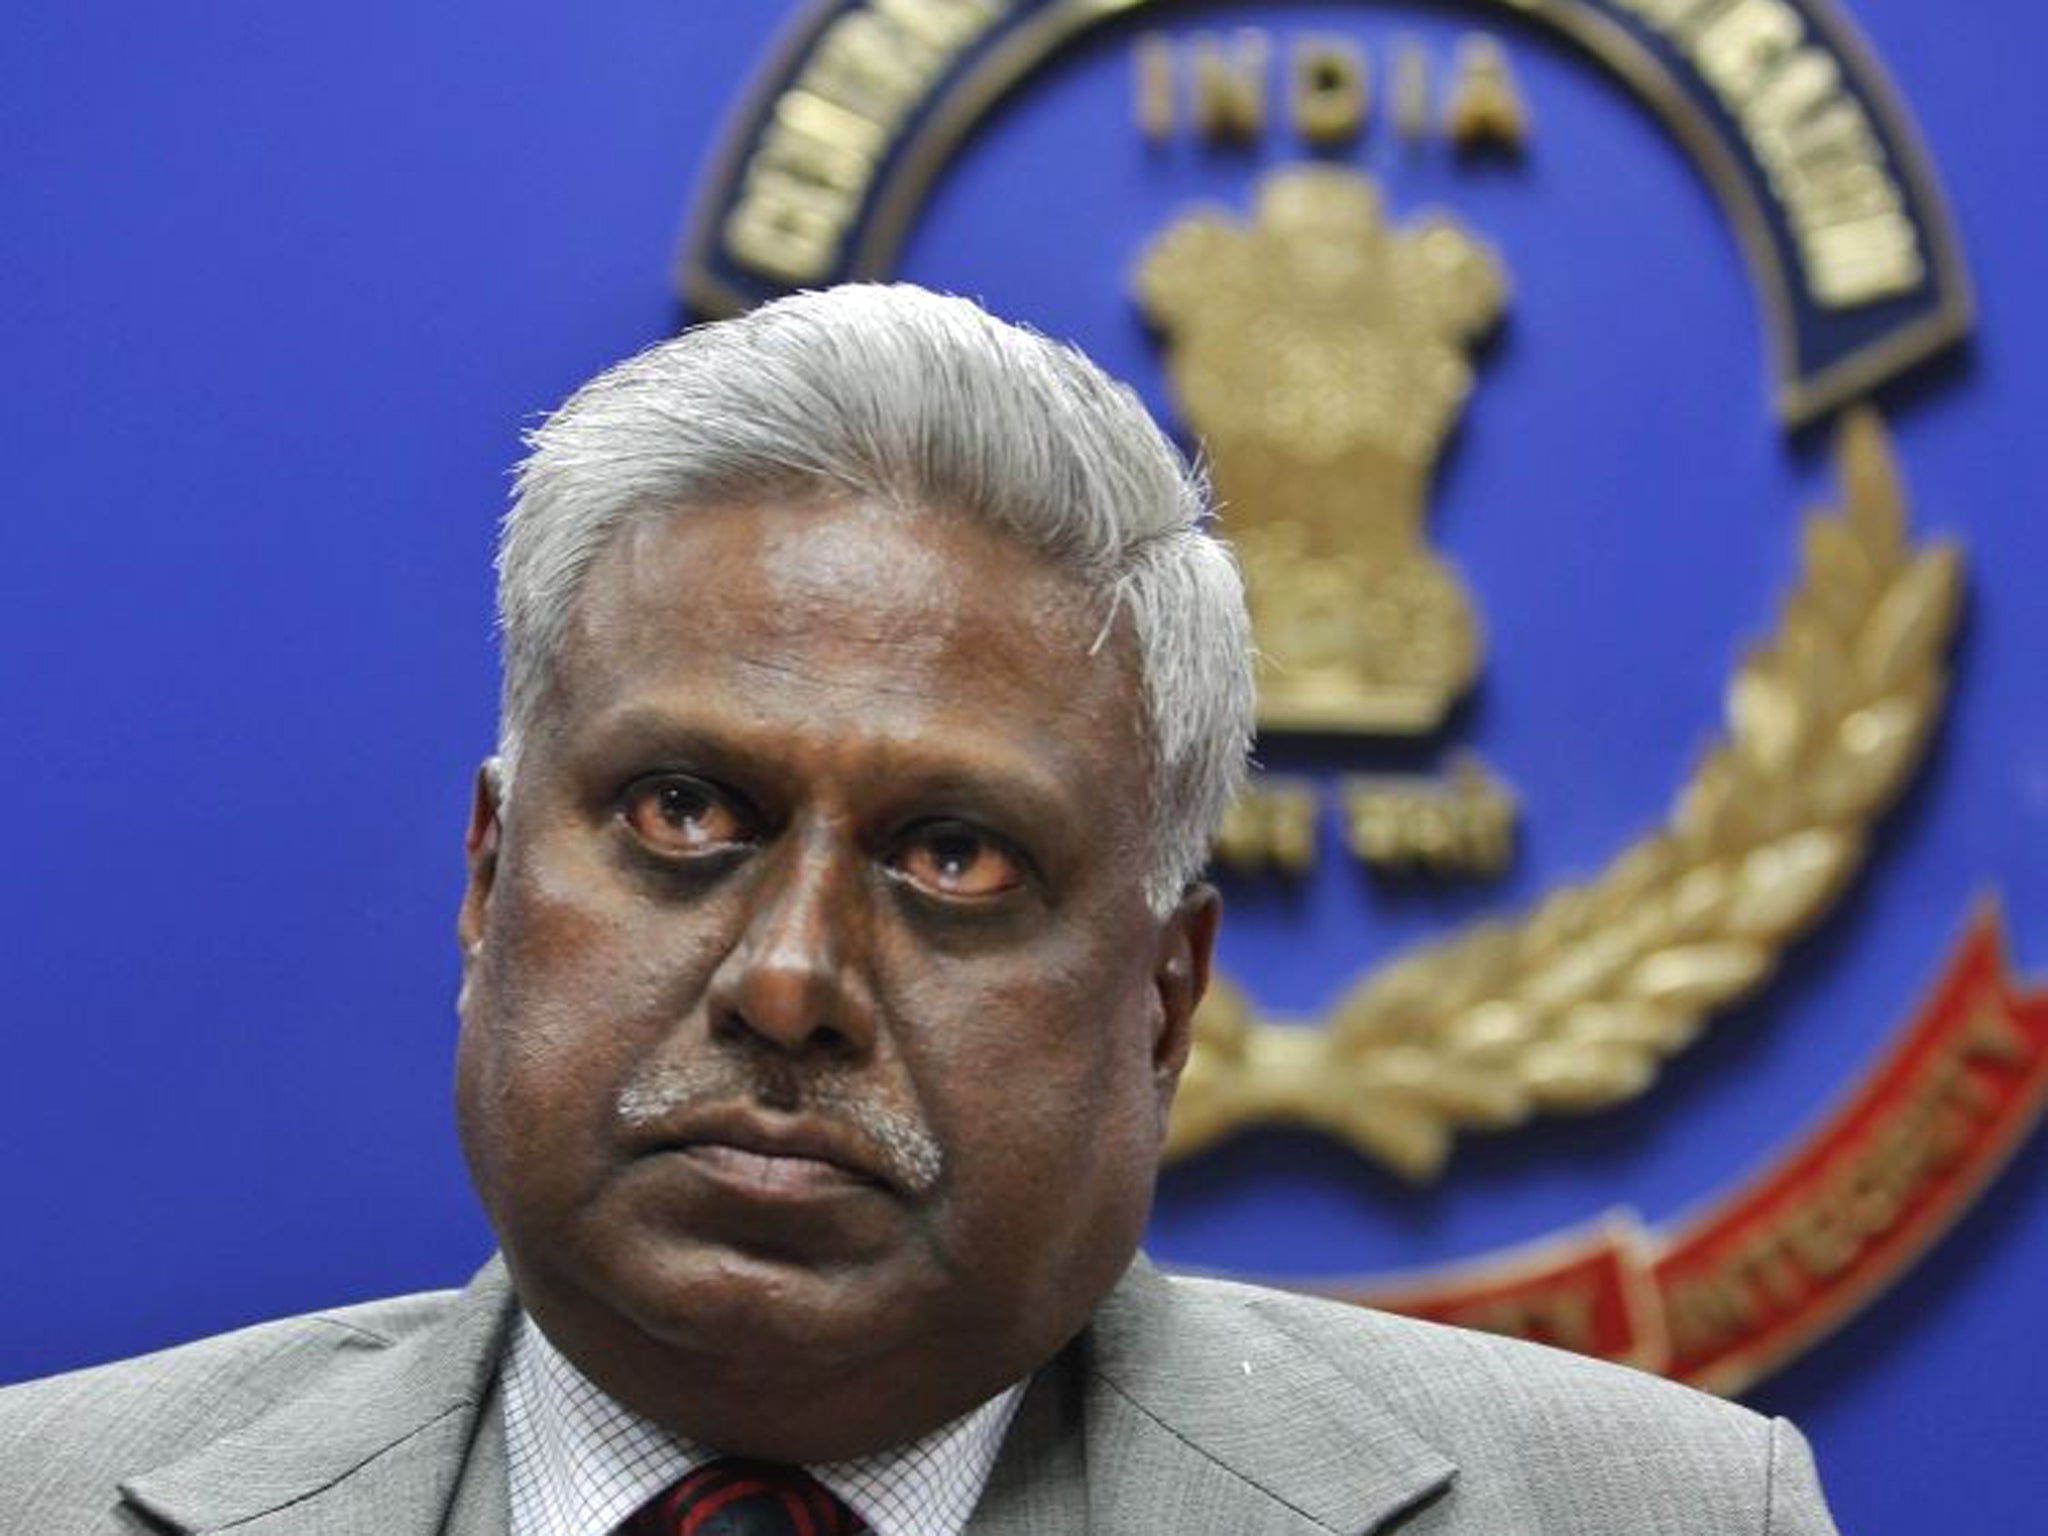 India's Central Bureau of Investigation (CBI) director Ranjit Sinha addresses a press conference. He came under fire today for controversial comments regarding rape